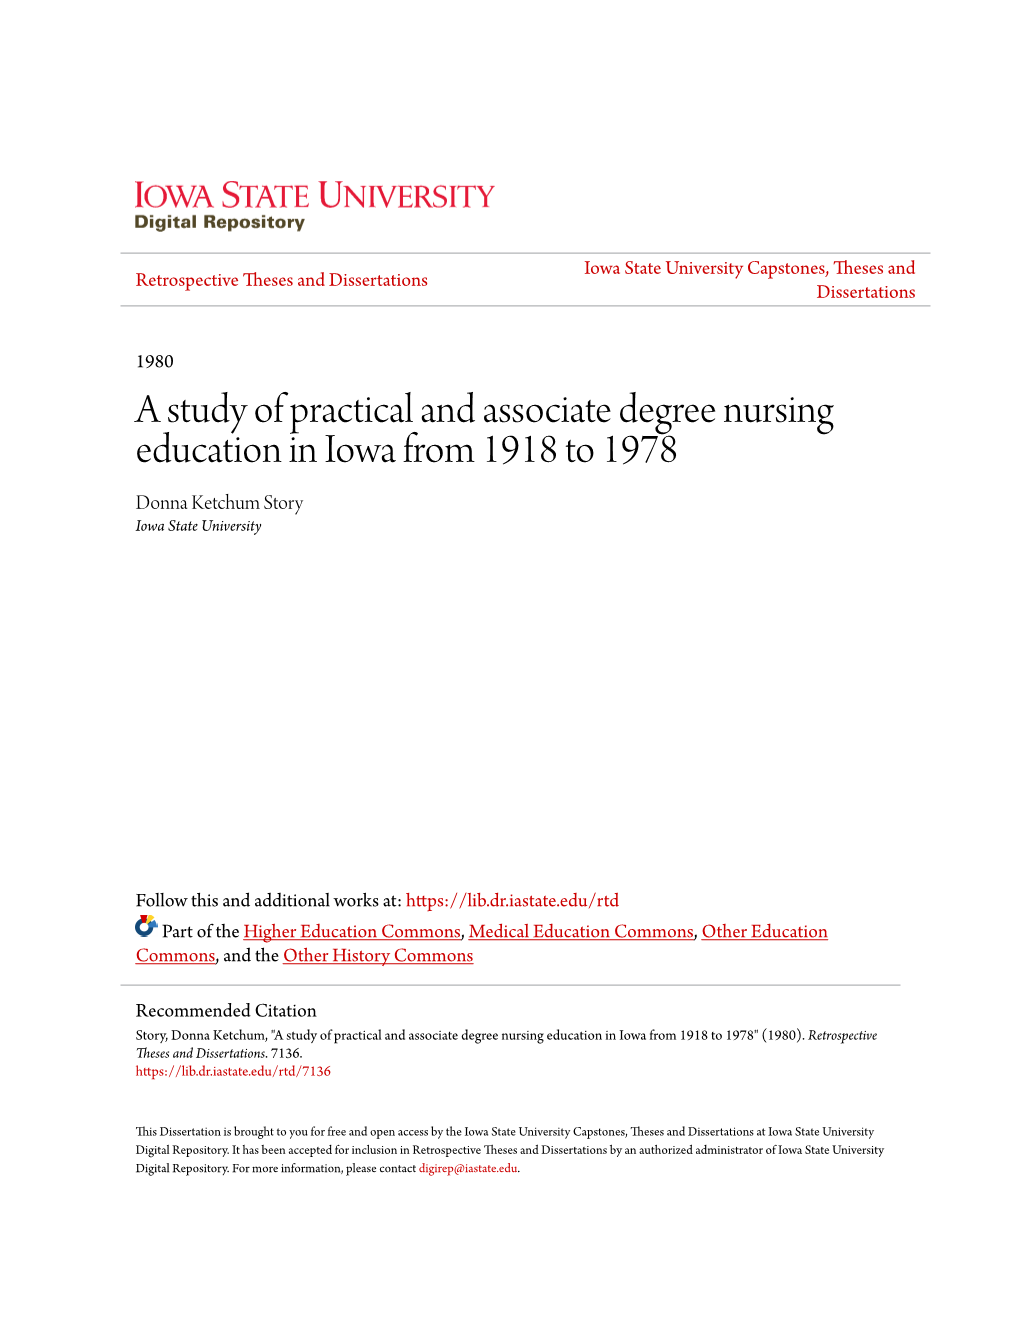 A Study of Practical and Associate Degree Nursing Education in Iowa from 1918 to 1978 Donna Ketchum Story Iowa State University